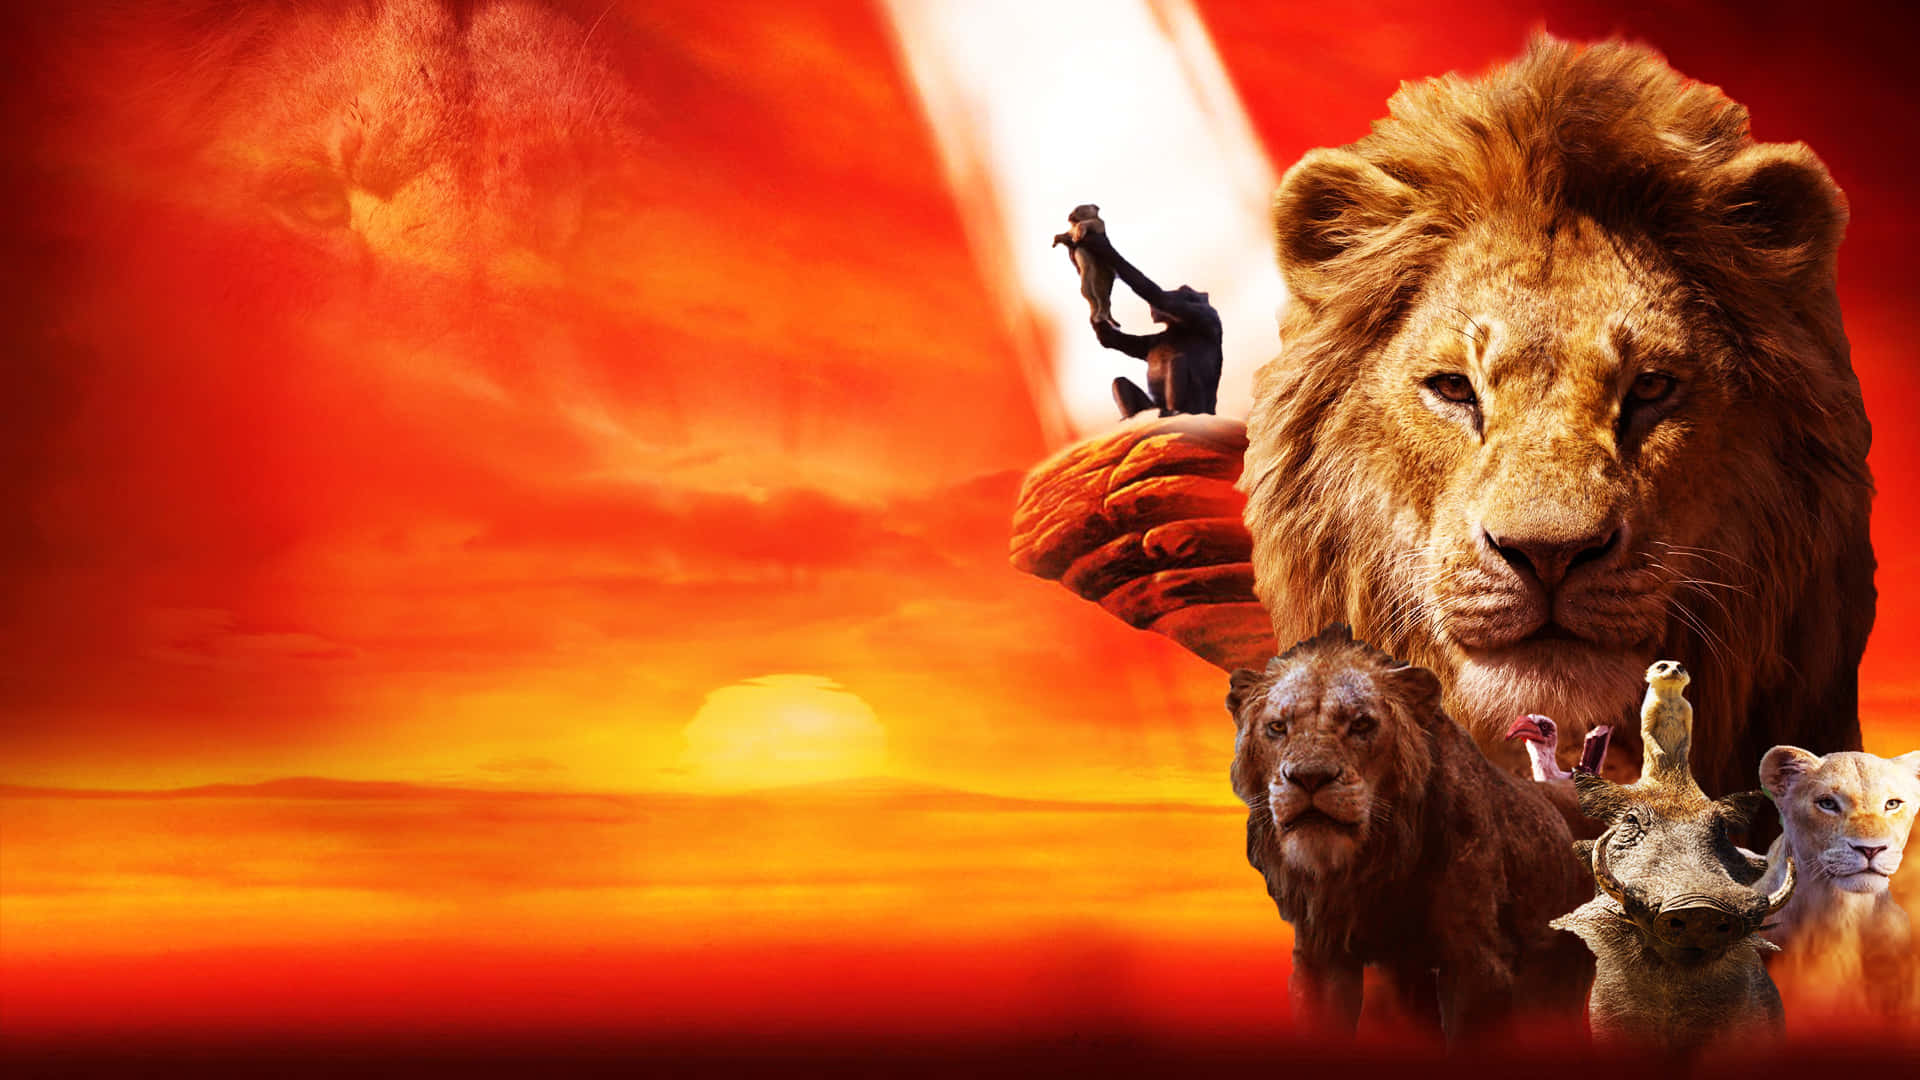 The Lion King  Disney phone backgrounds Wallpaper iphone disney Disney  phone wallpaper